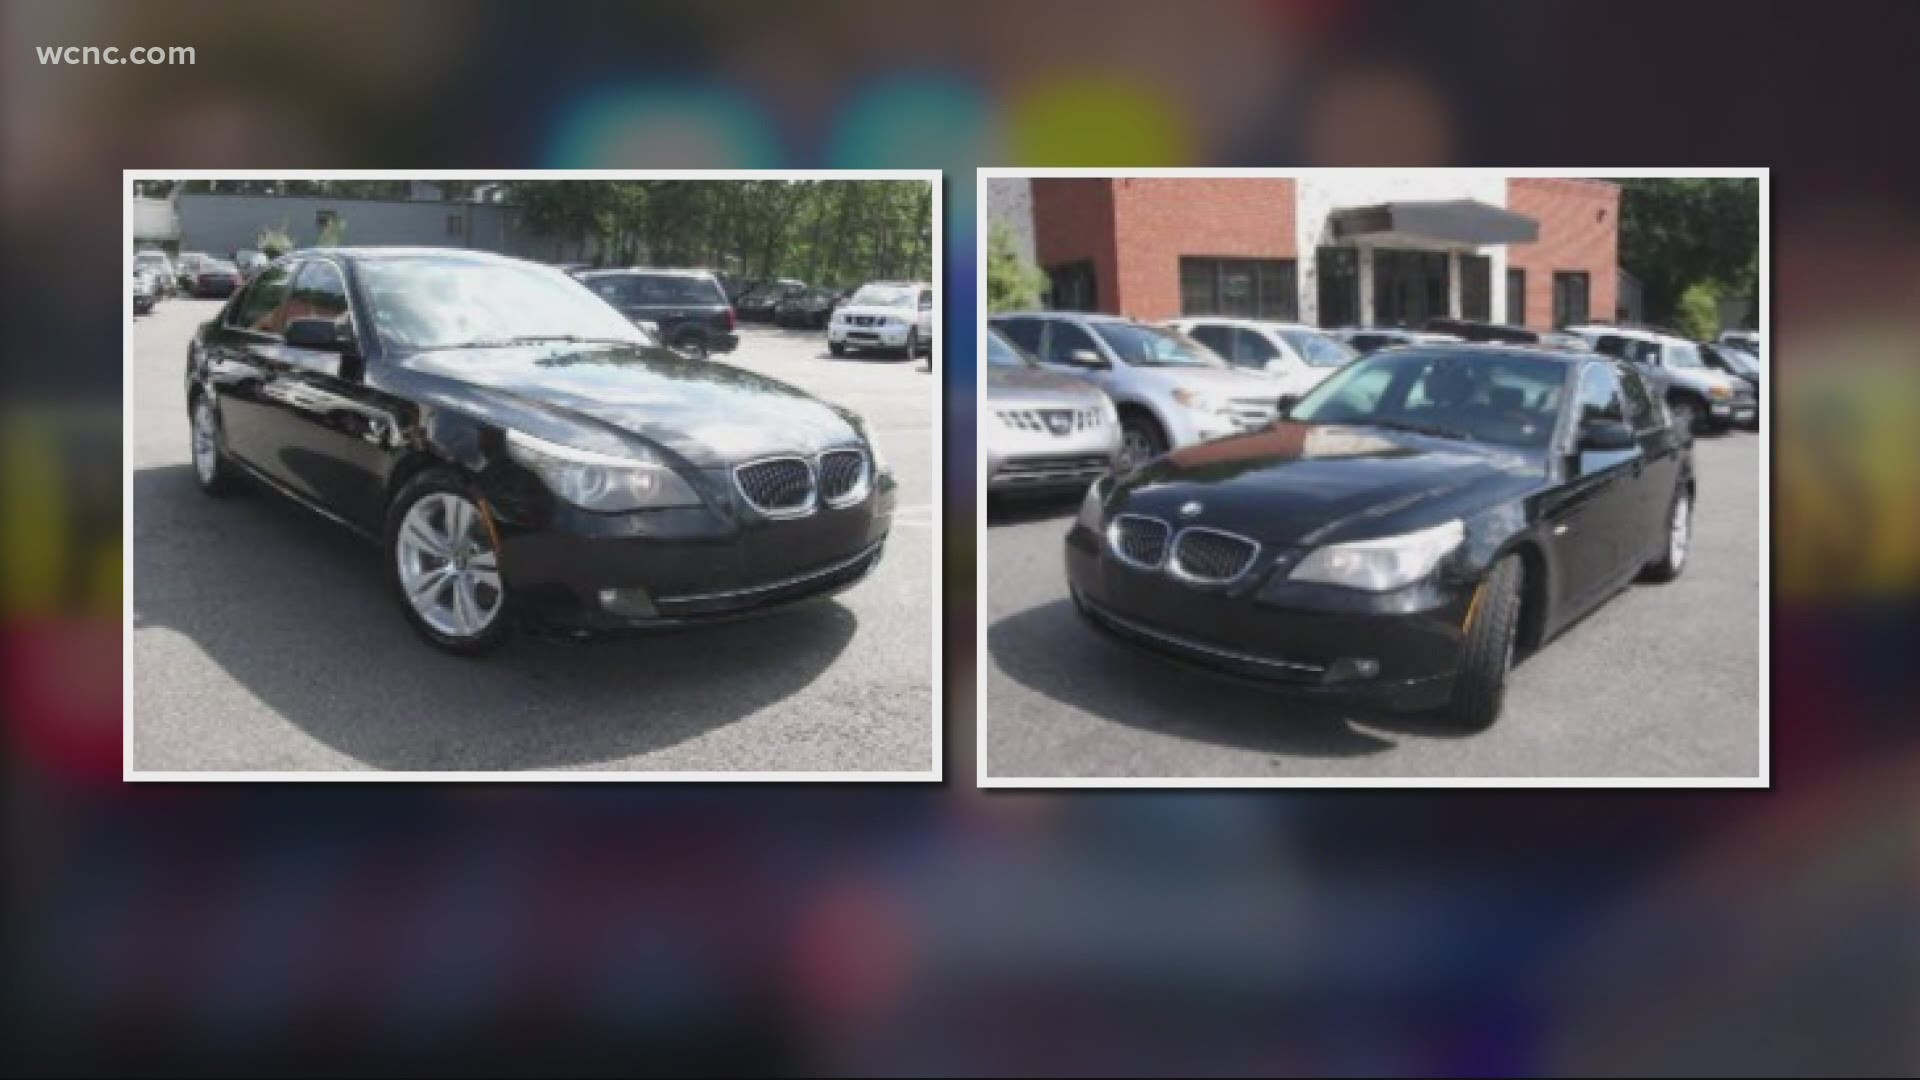 Police say they are looking for the person responsible in a hit-and-run in York County.